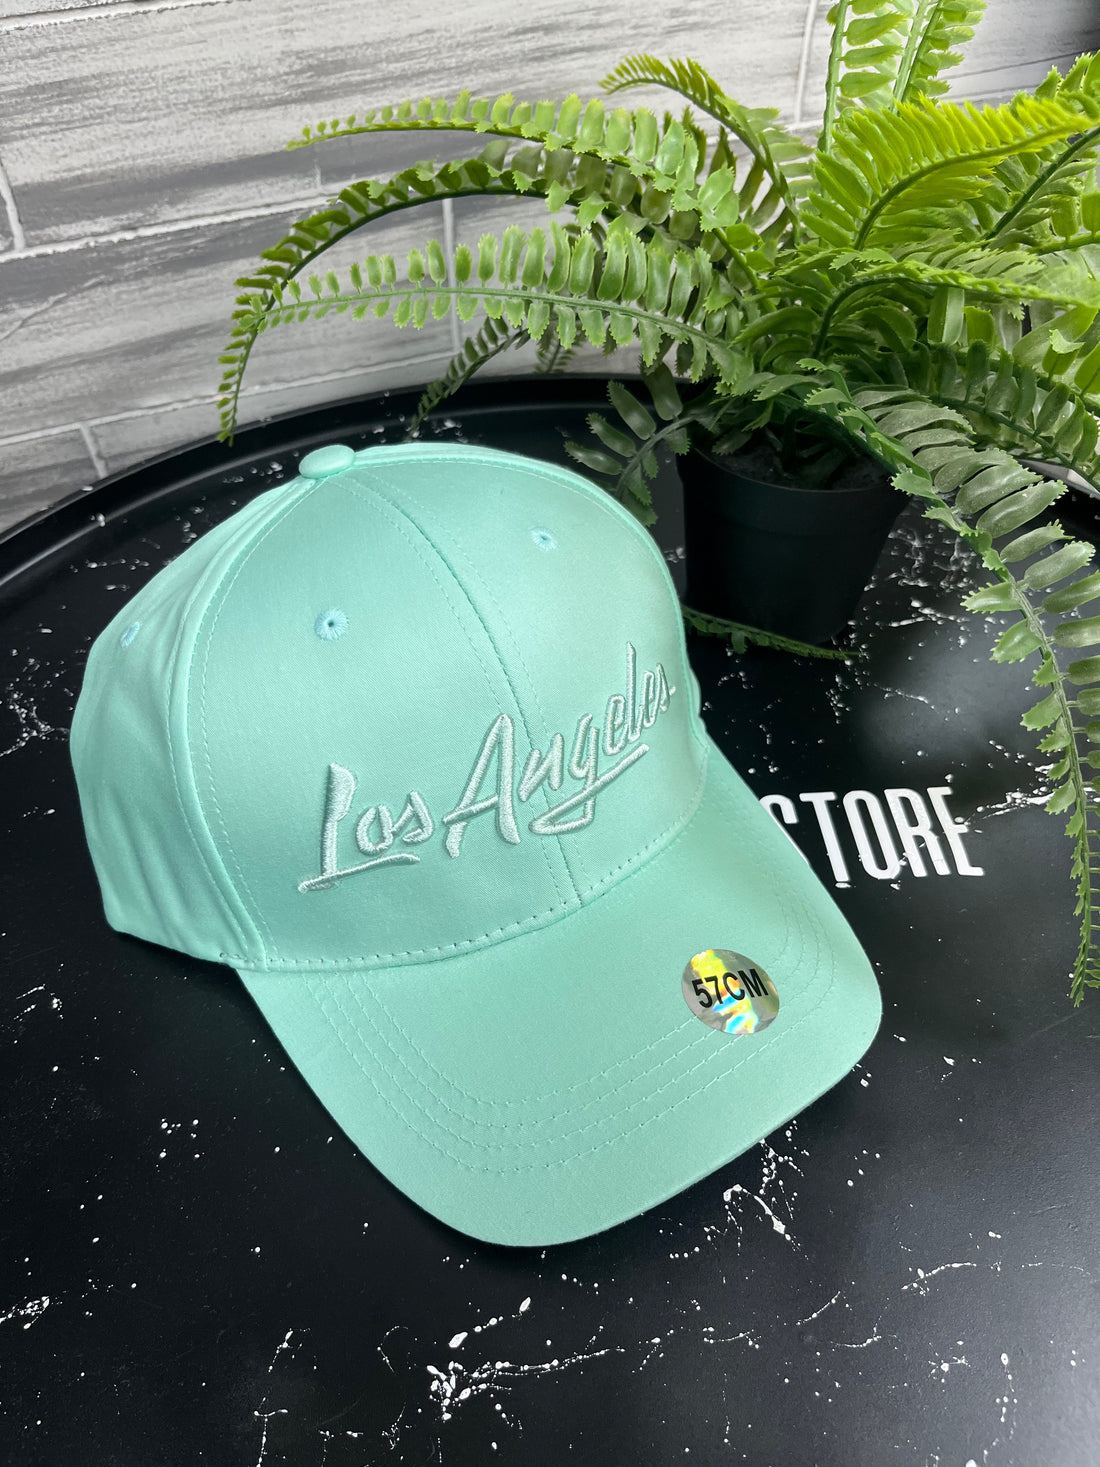 Casquette Los Angeles mint - Stayin